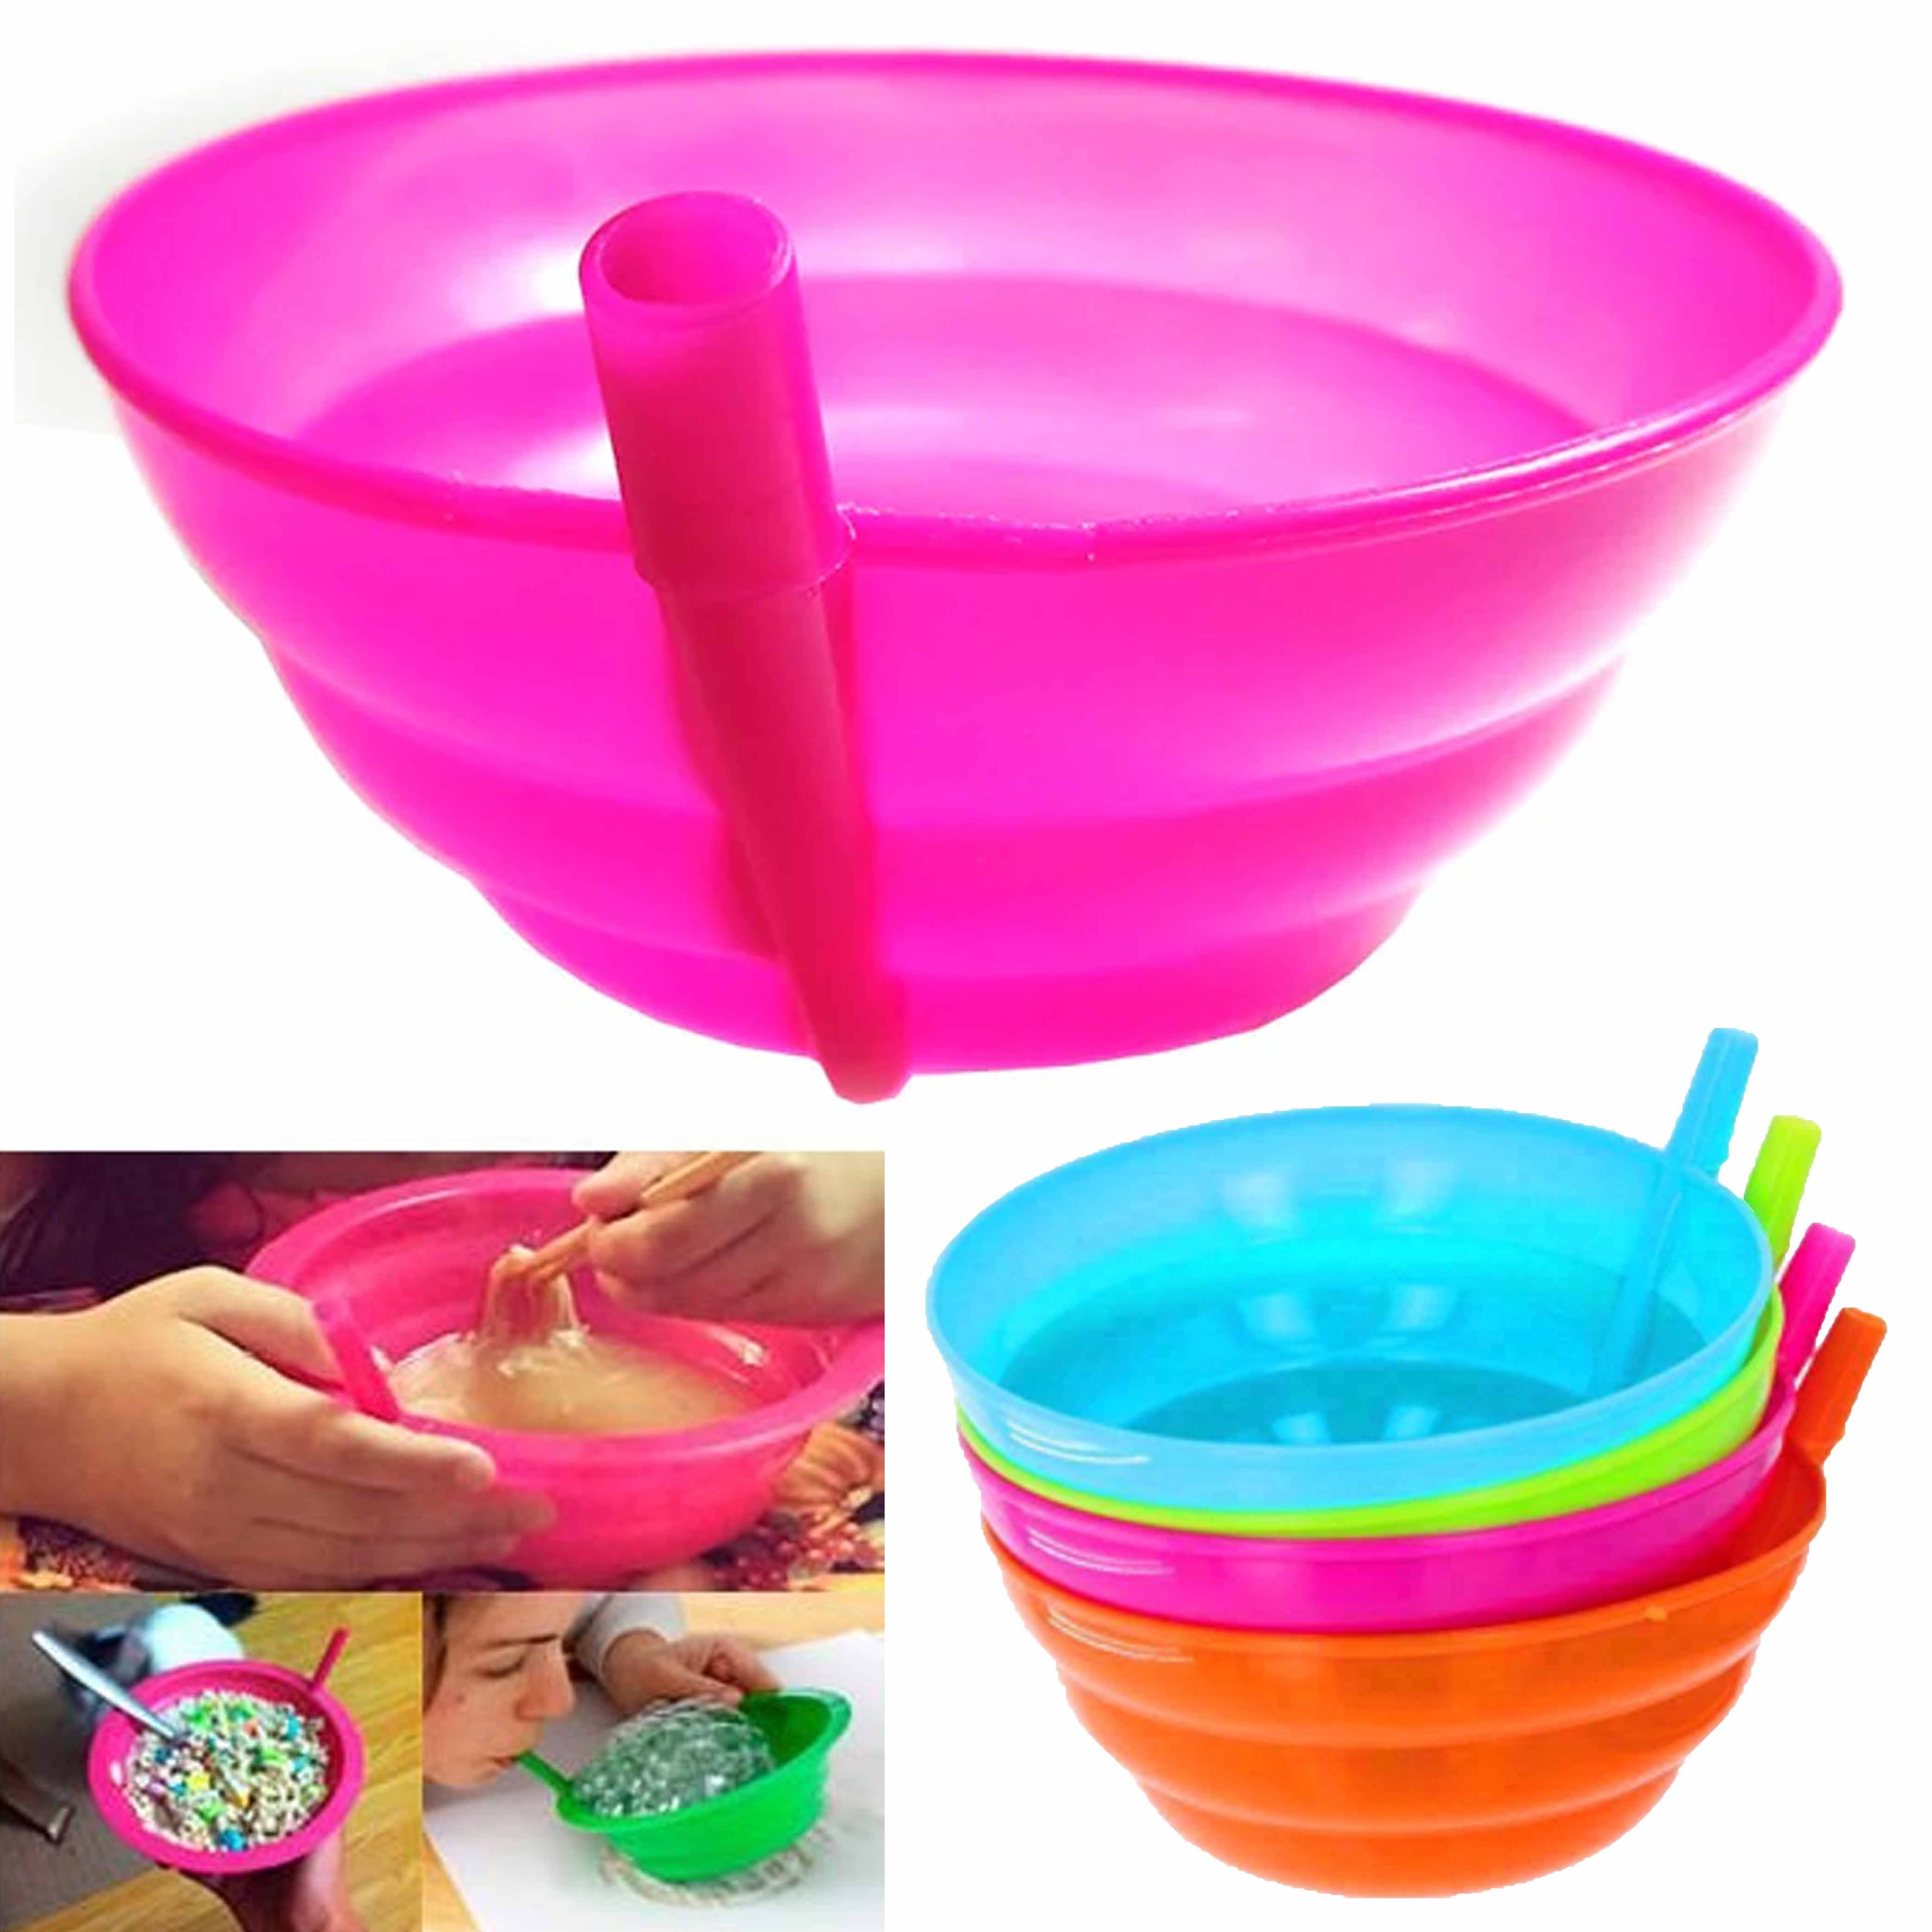 Buodes Ramen Bowls Thermos Bowl Childrens Silicone India